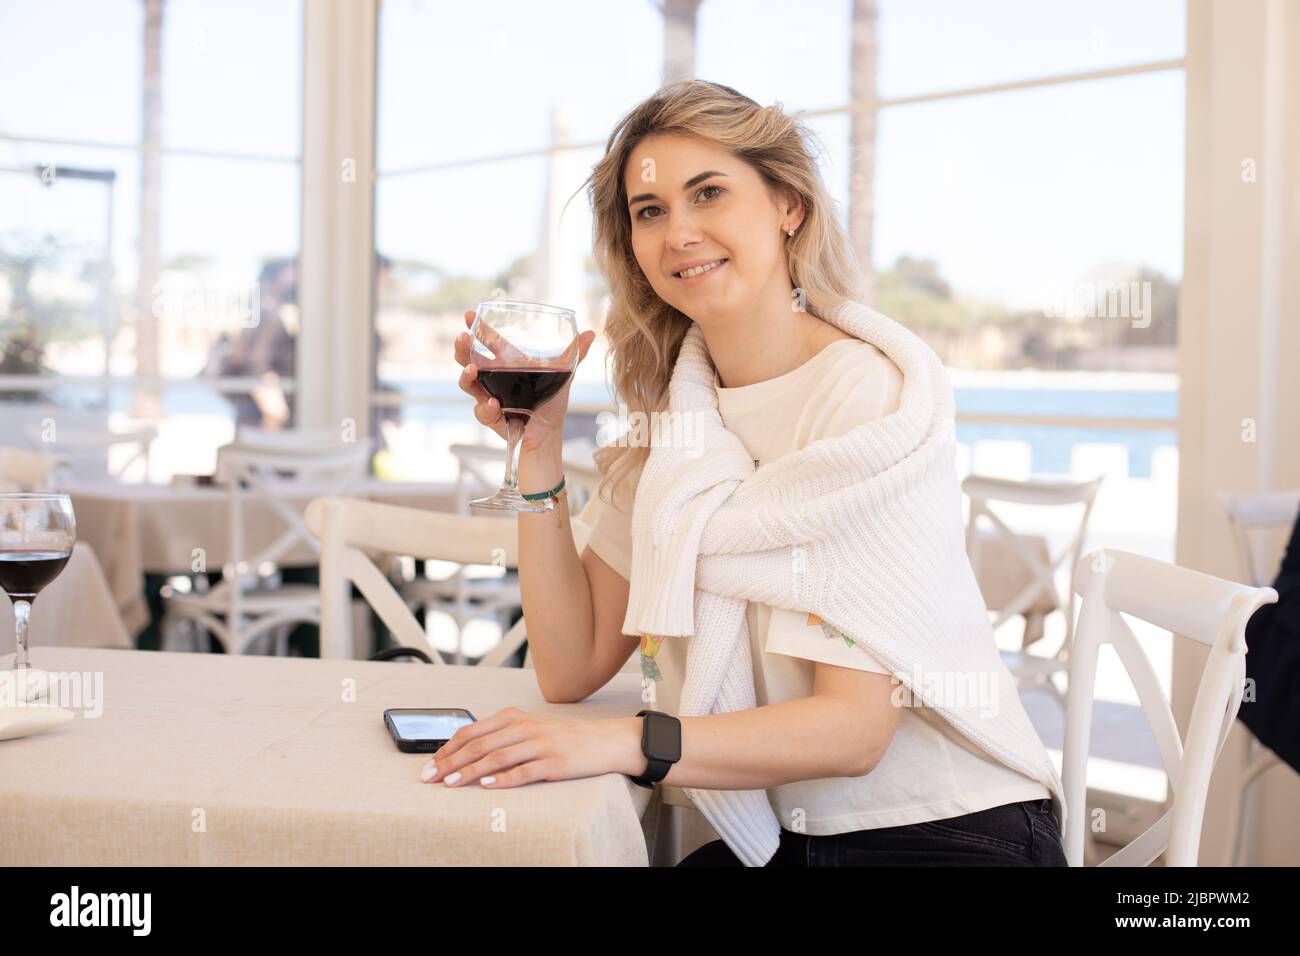 Portrait of young happy woman sitting at table near smartphone, holding glass of wine in restaurant near embankment. Stock Photo